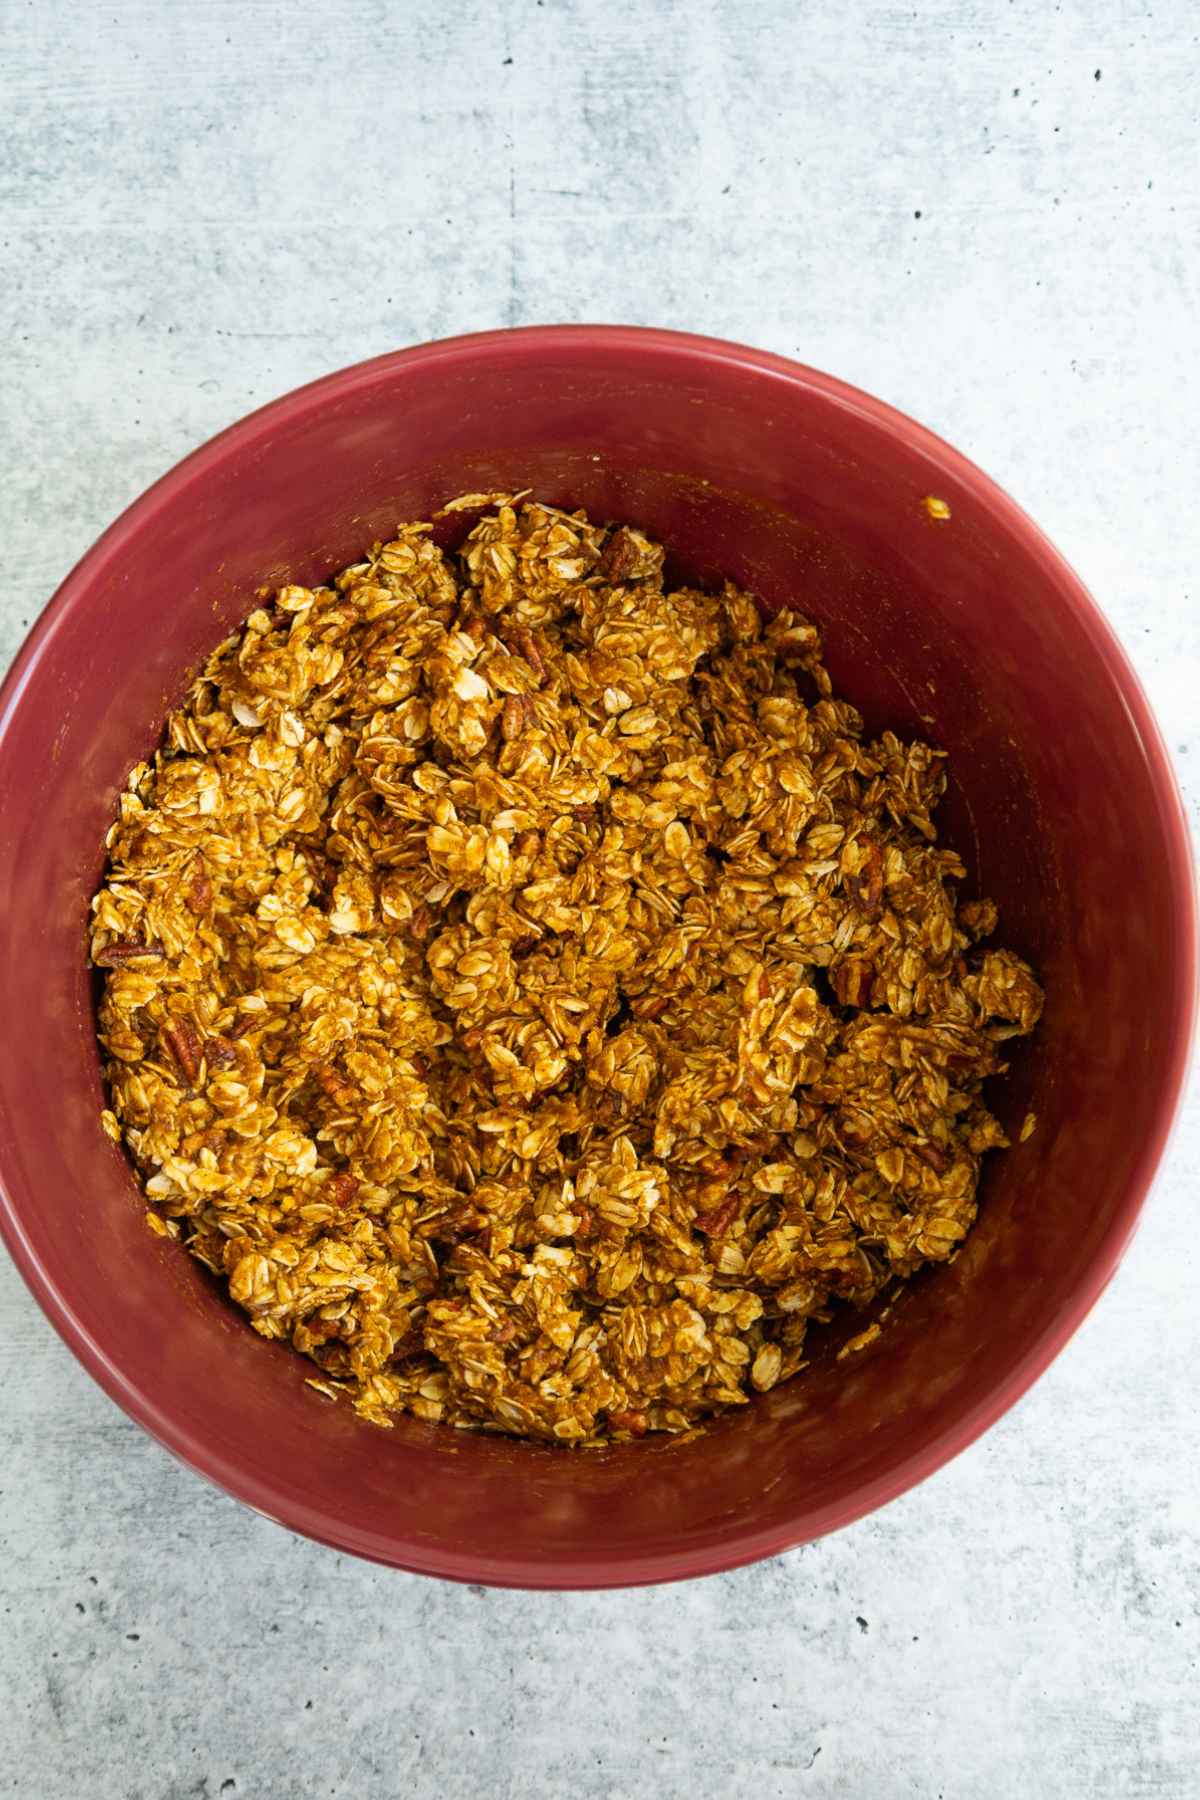 Oat mixture and pumpkin mixture combined in a mixing bowl.